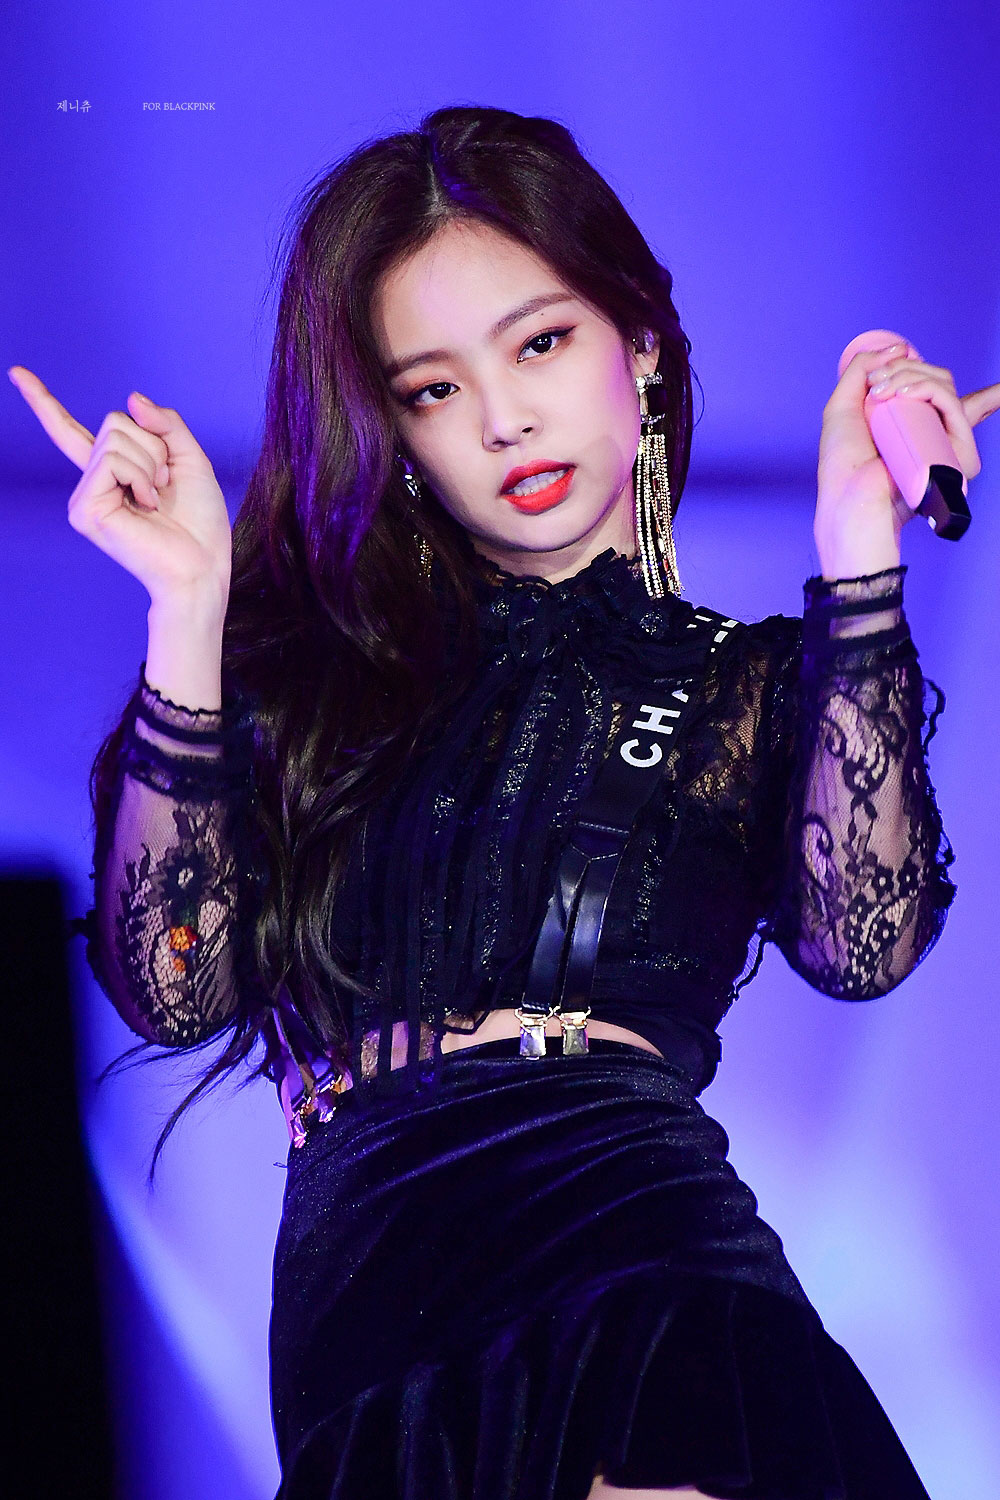 Get Top with Lace and Skirt Set | Jennie - Blackpink | K-Fashion at ...